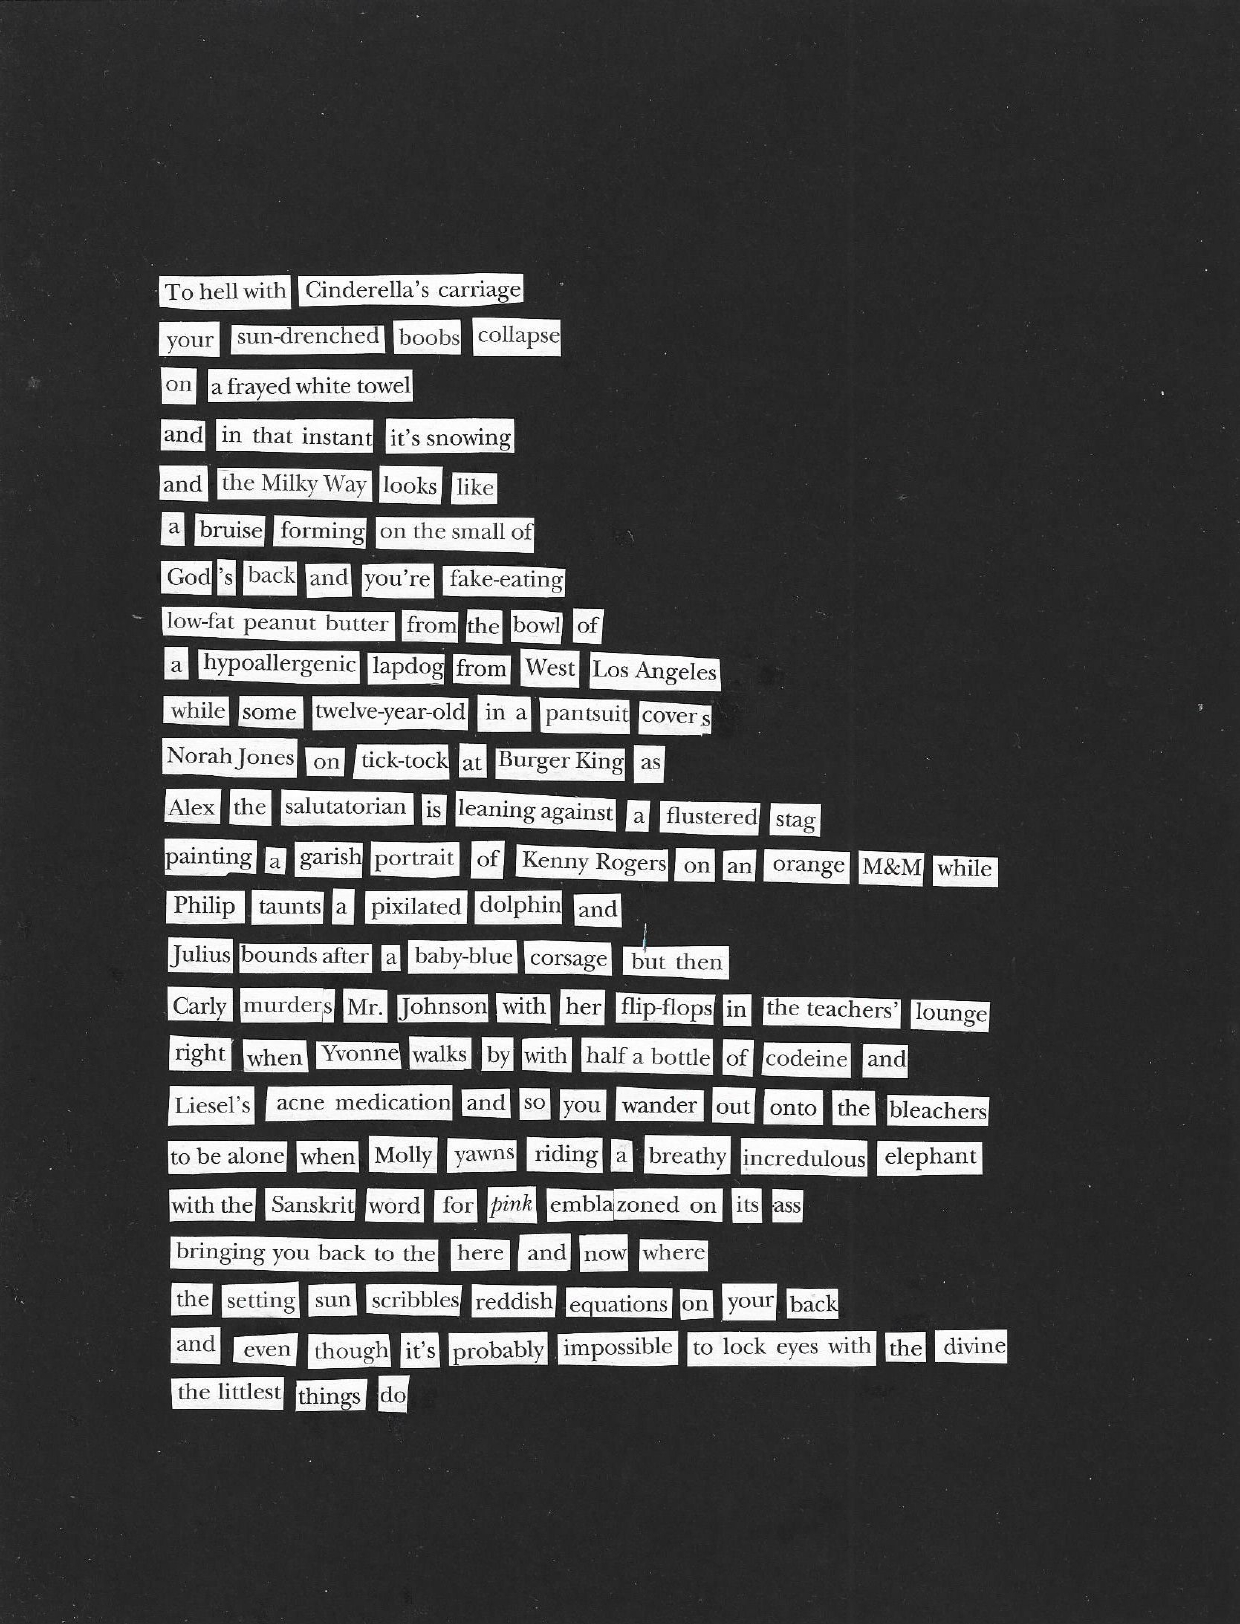 The text is composed of words cut from magazines and pasted on a black background: "To hell with Cinderella's carriage / your sun-drenched boobs collapse / on a frayed white towel / and in that instant it's snowing / and the Milky Way looks like / a bruise forming on the small of / God's back and you're fake-eating / low-fat peanut butter from the bowl of / a hypoallergenic lapdog from West Los Angeles / while some twelve-year-old in a pantsuit covers / Norah Jones on tick-tock at Burger King as / Alex the salutatorian is leaning against a flustered stag / painting a garish portrait of Kenny Rogers on an orange M&M while / Philip taunts a pixilated dolphin and / Julis bounds after a baby-blue corsage but then / Carly murders Mr. Johnson with her flip-flops in the teachers' lounge / and right when Yvonne walks by with half a bottle of codeine and / Liesel's acne medication and so you wander out onto the bleachers / to be alone when Molly yawns riding a breathy incredulous elephant / with the Sanskrit word for 'pink' emblazoned on its ass / bringing you back to the here and now where / the setting sun scribbles reddish equations on your back / and even though it's probably impossible to lock eyes with the divine / the littlest things do."